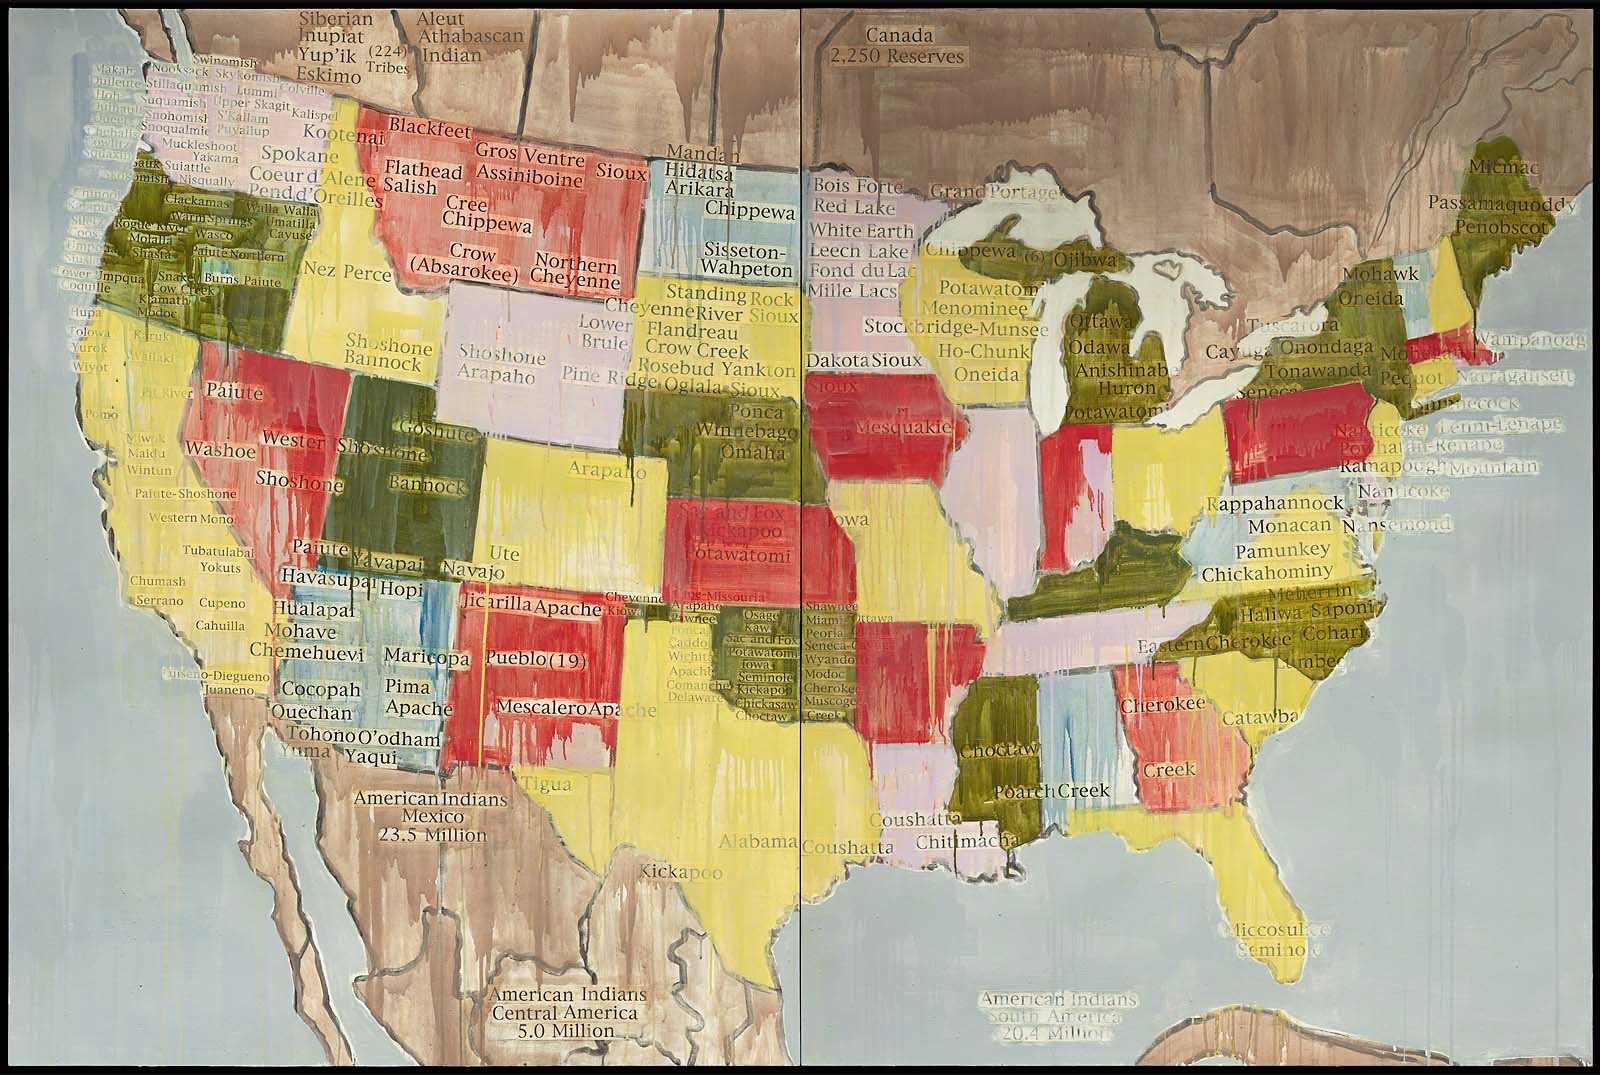 Painting of a map of the continental united States, with the states rendered in hues of yellow, green, red, blue, and pink, and state names replaced by Native American tribal names